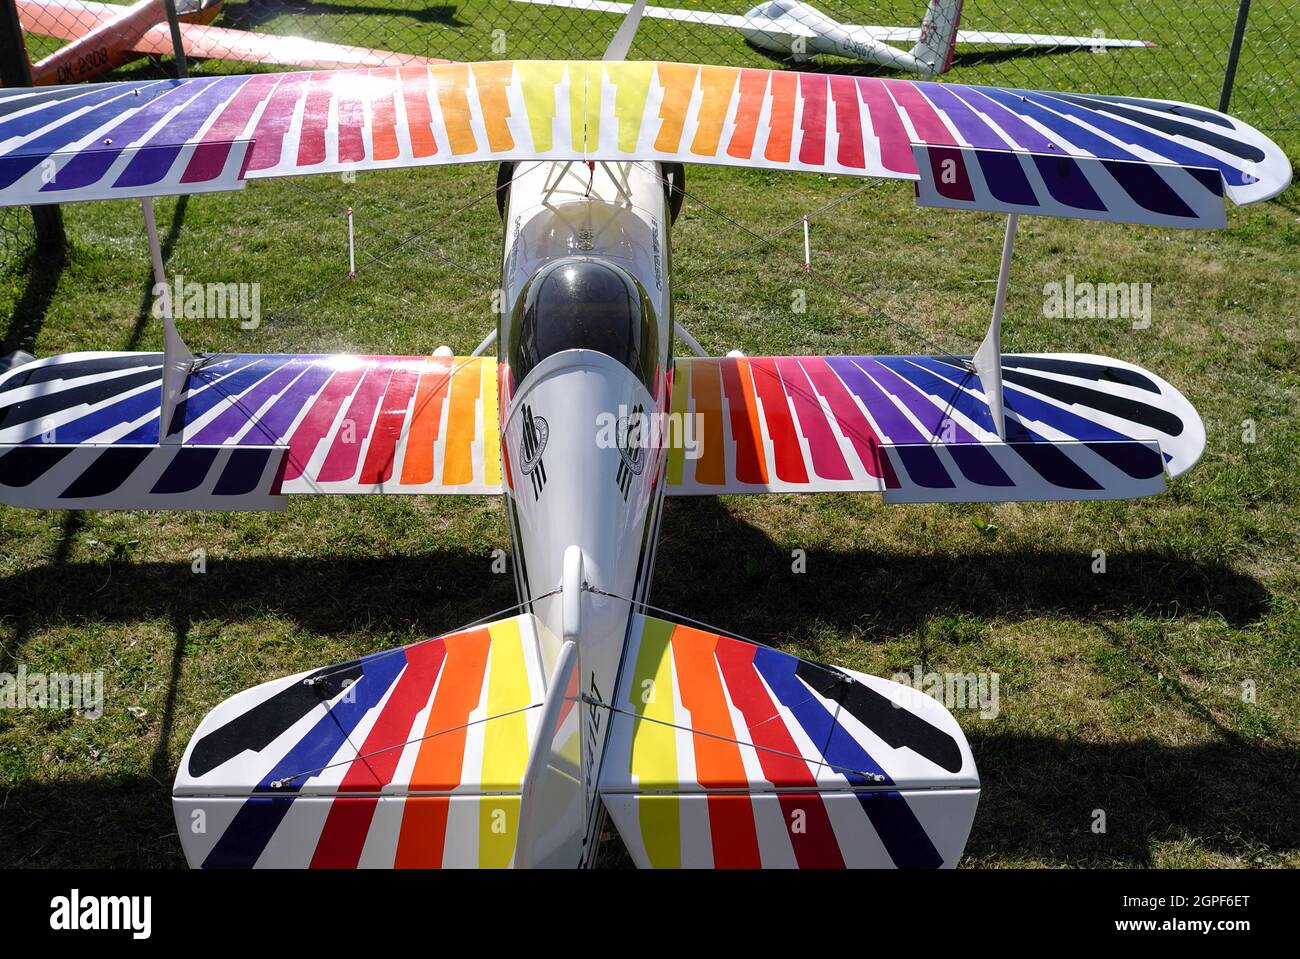 Remote controlled colorful biplane aerobatic model Christen Eagle with propeller on the ground in Germany, Europe Stock Photo